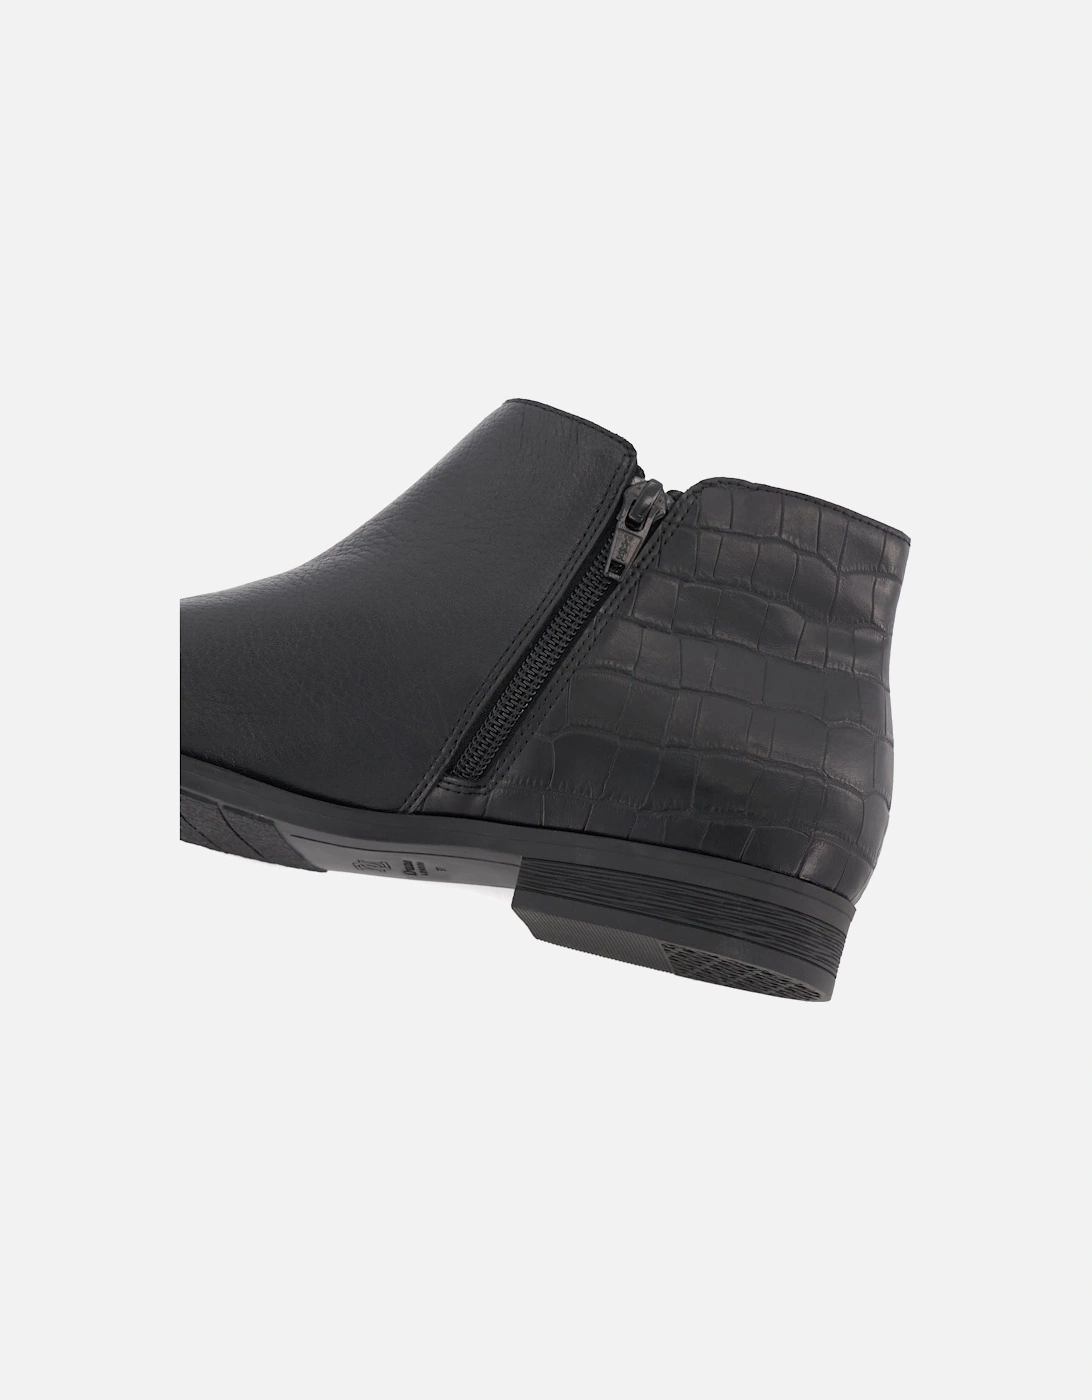 Ladies Pond - Casual Ankle Boots